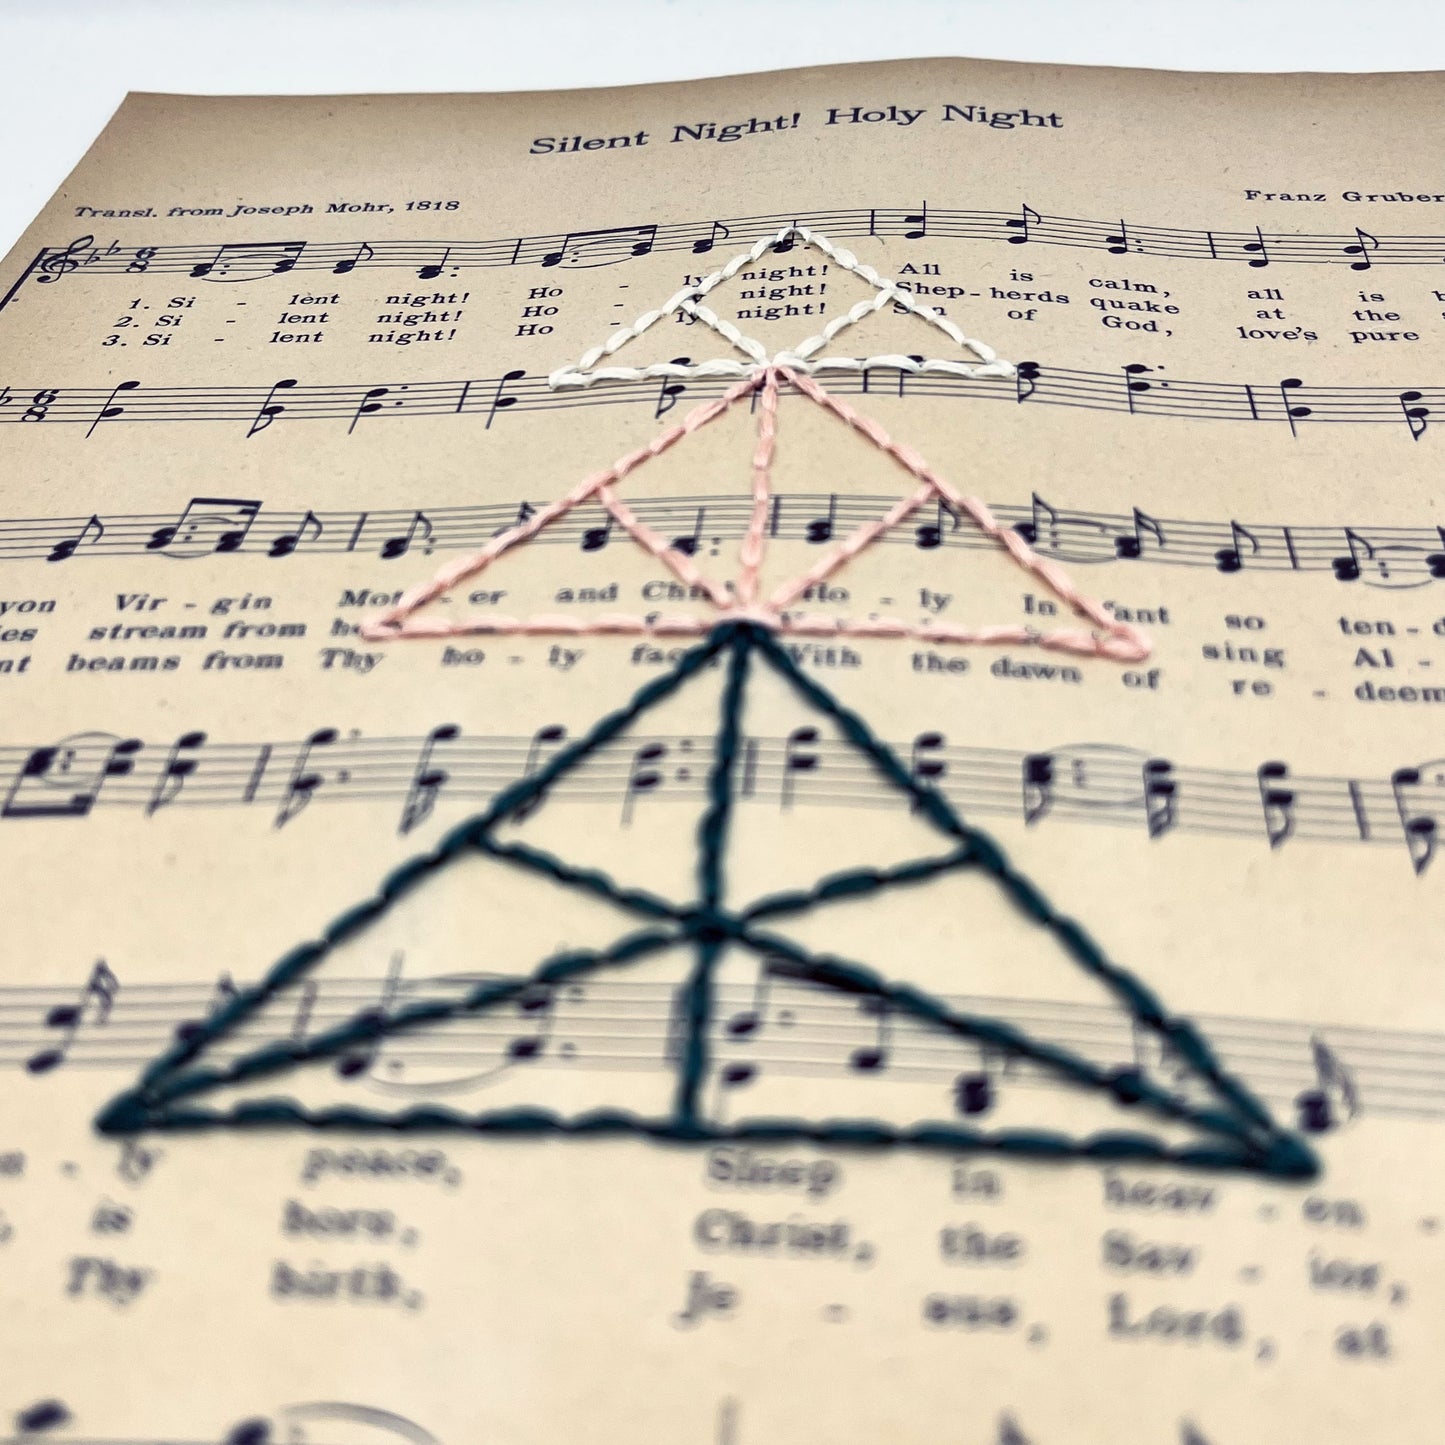 a close up angled view of sheet music from the Christmas song "Silent Night", hand stitched over with a Christmas tree made from triangles, in green, peach and ivory thread